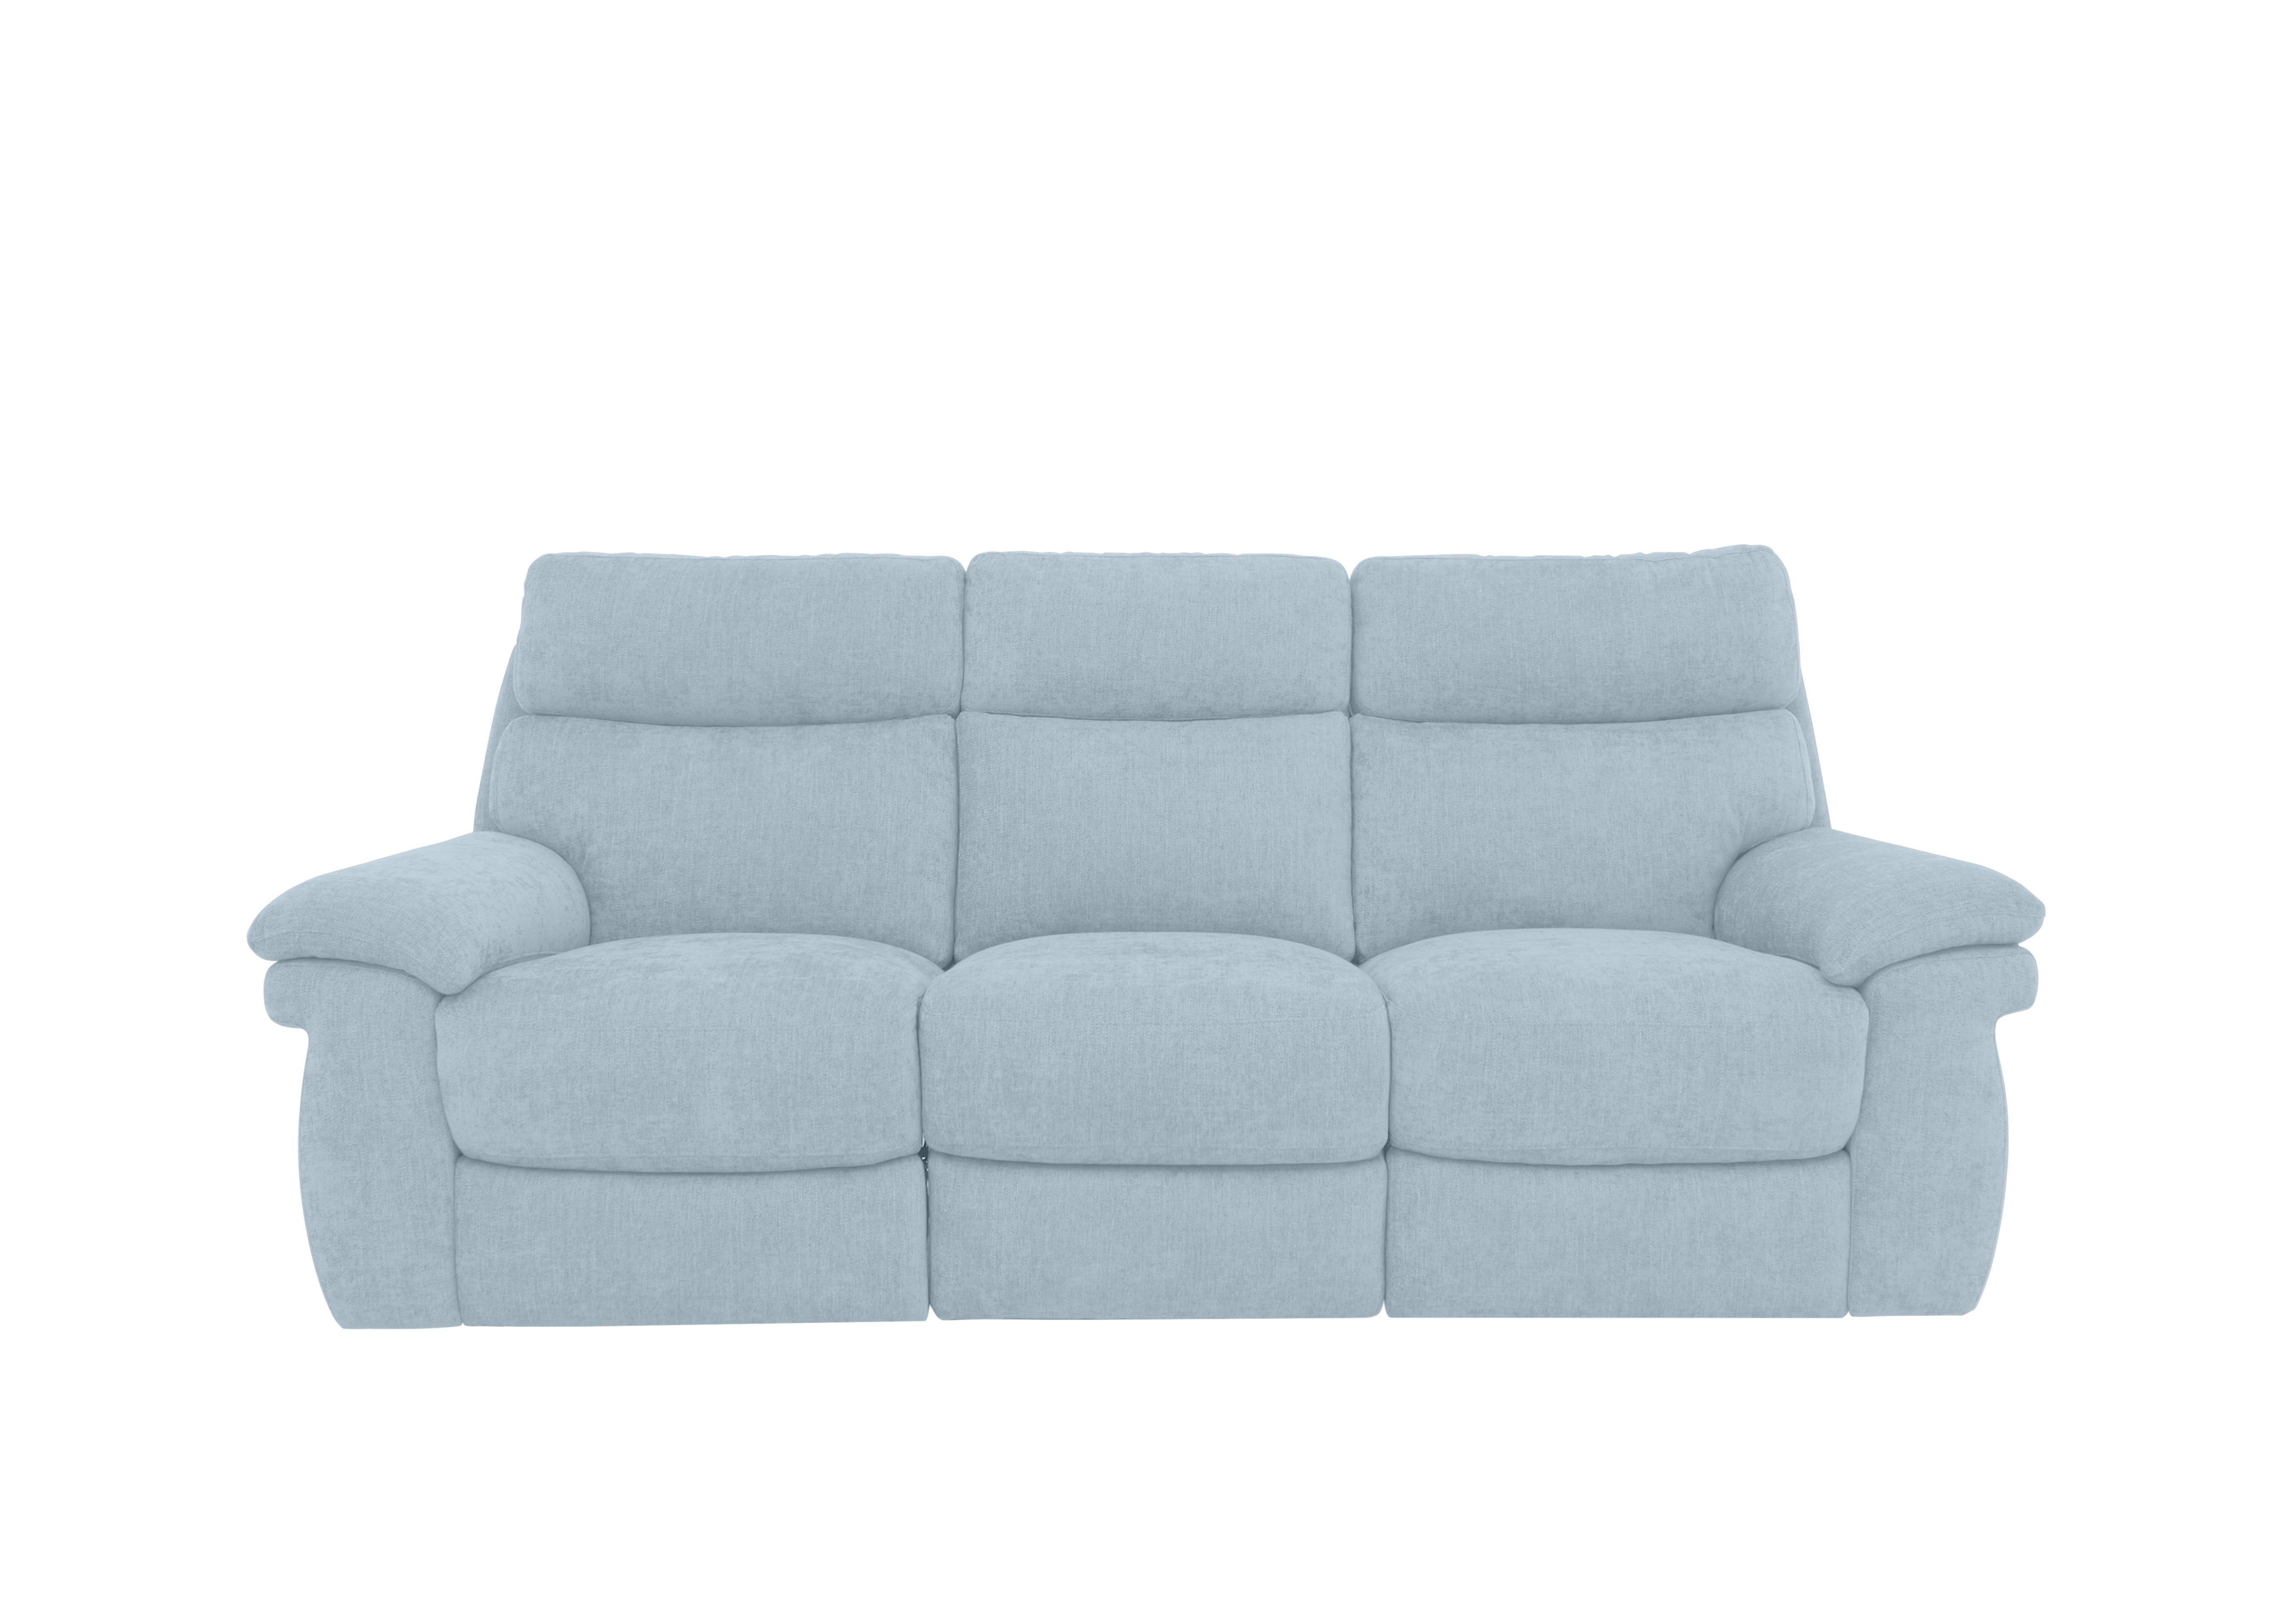 Serene 3 Seater Fabric Power Recliner Sofa with Power Headrests in Fab-Meo-R17 Baby Blue on Furniture Village